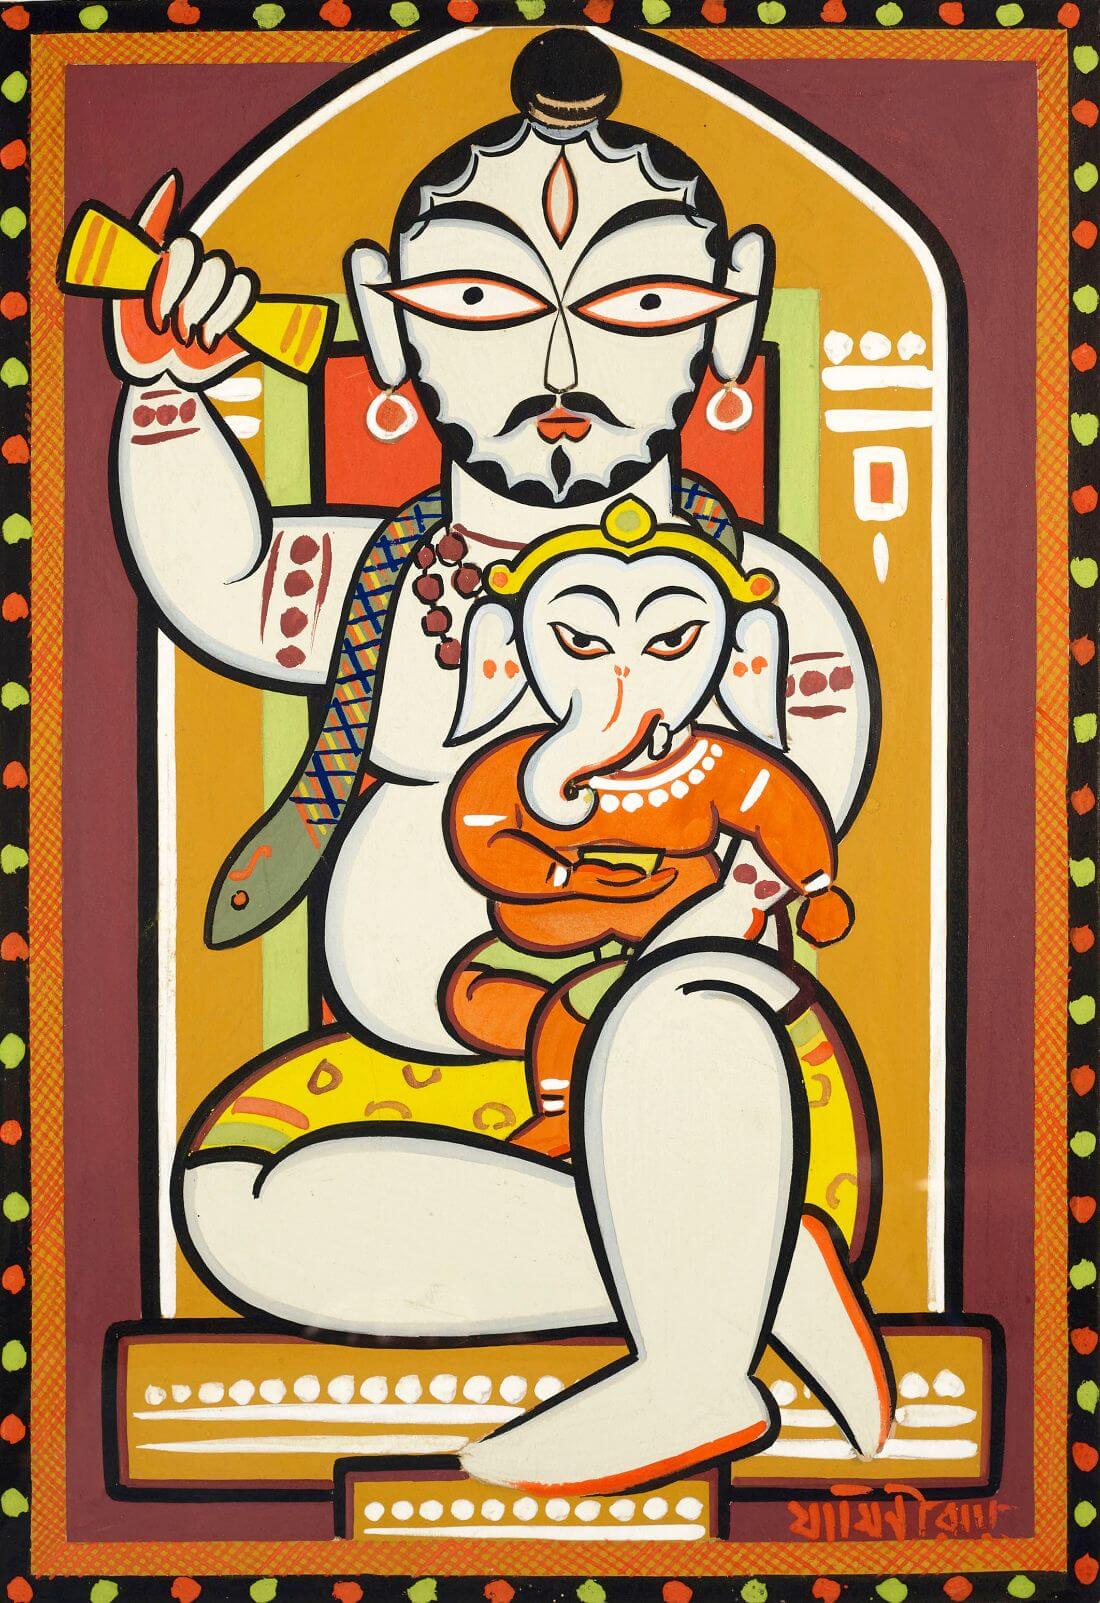 Jamini Roy The First Indian Modernist Painting | Prinseps